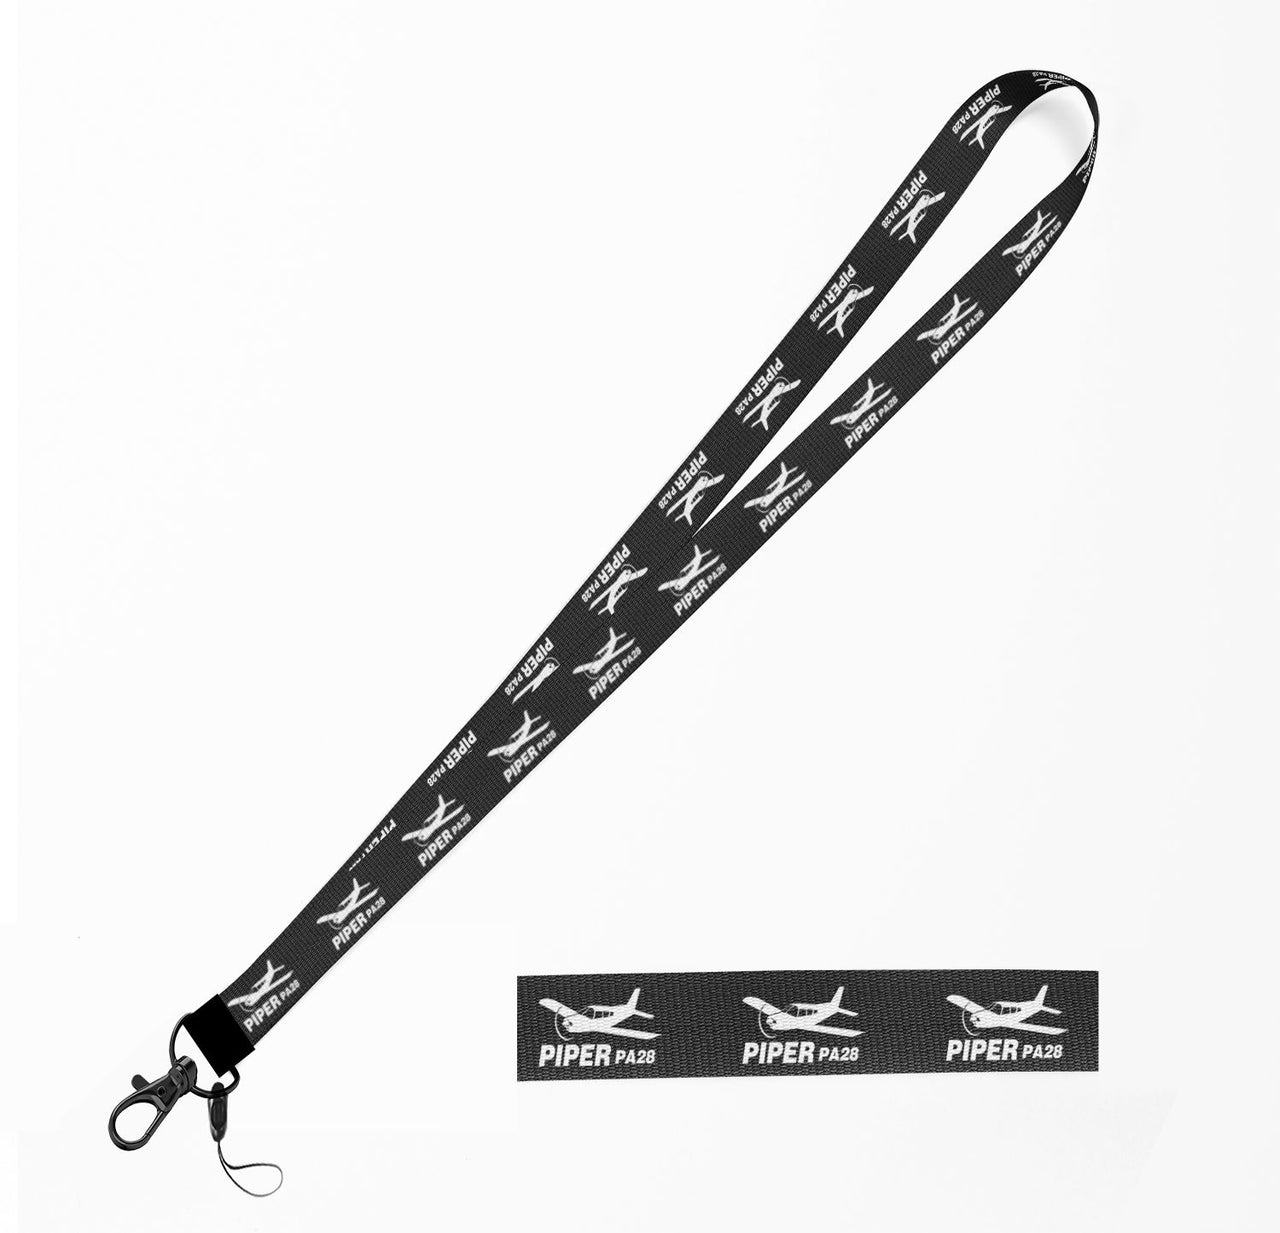 The Piper PA28 Designed Lanyard & ID Holders